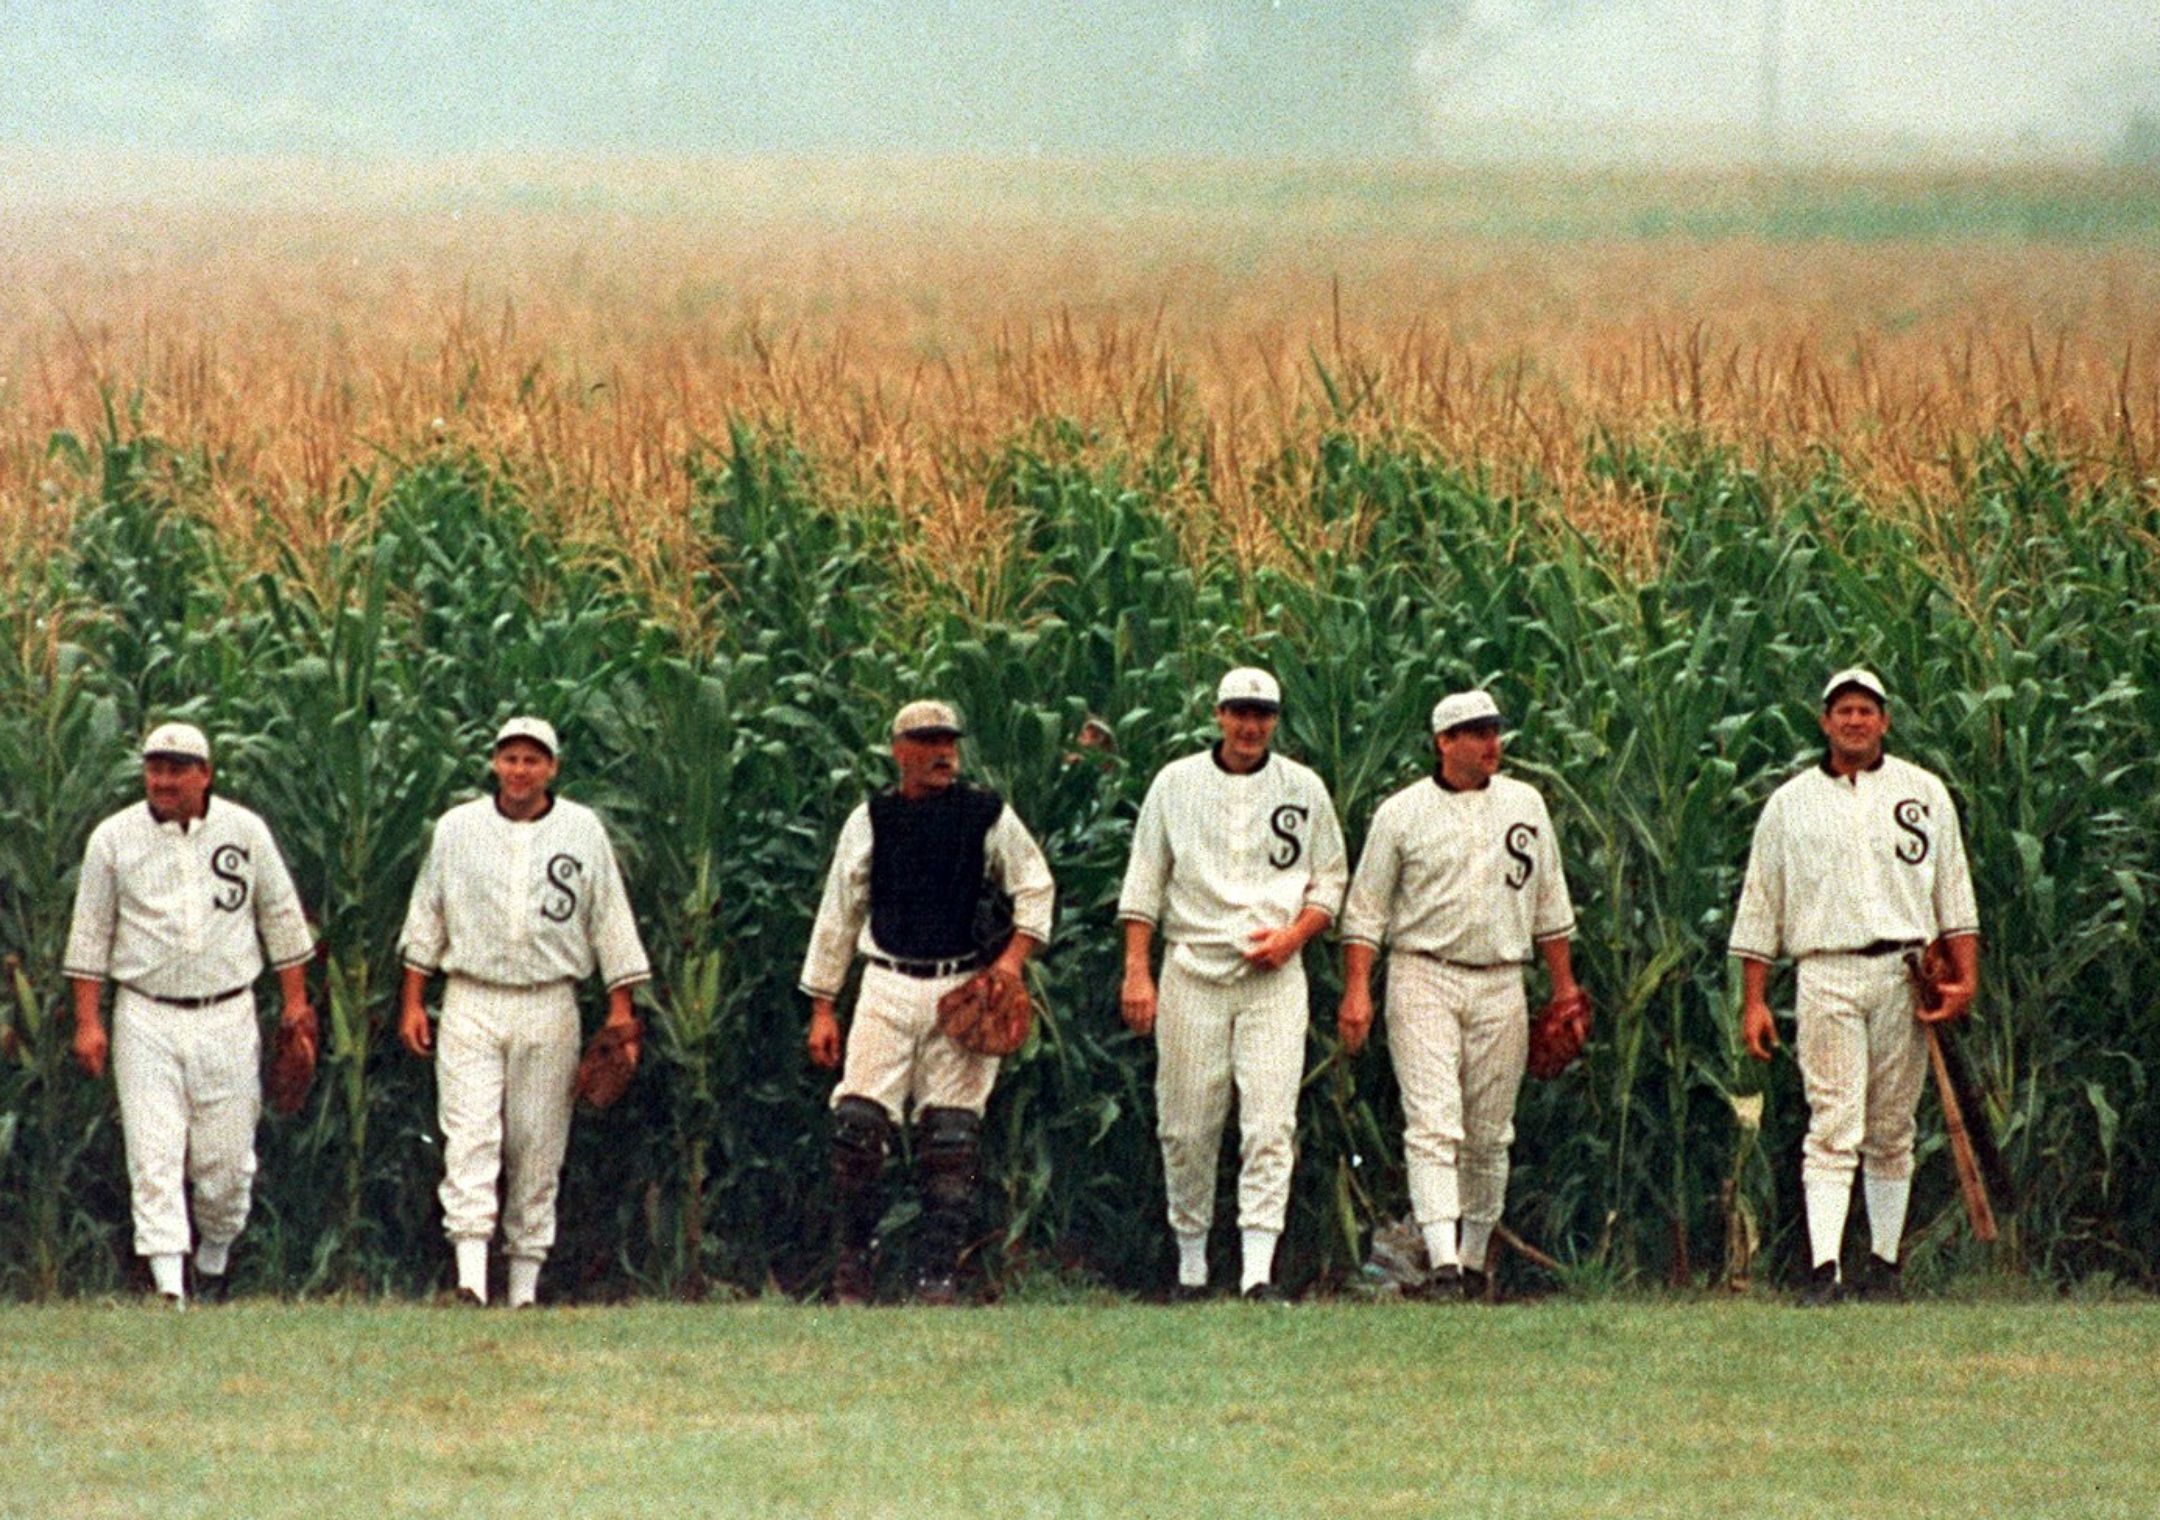 Six men dressed in old baseball uniforms, walking toward the camera out of a corn field